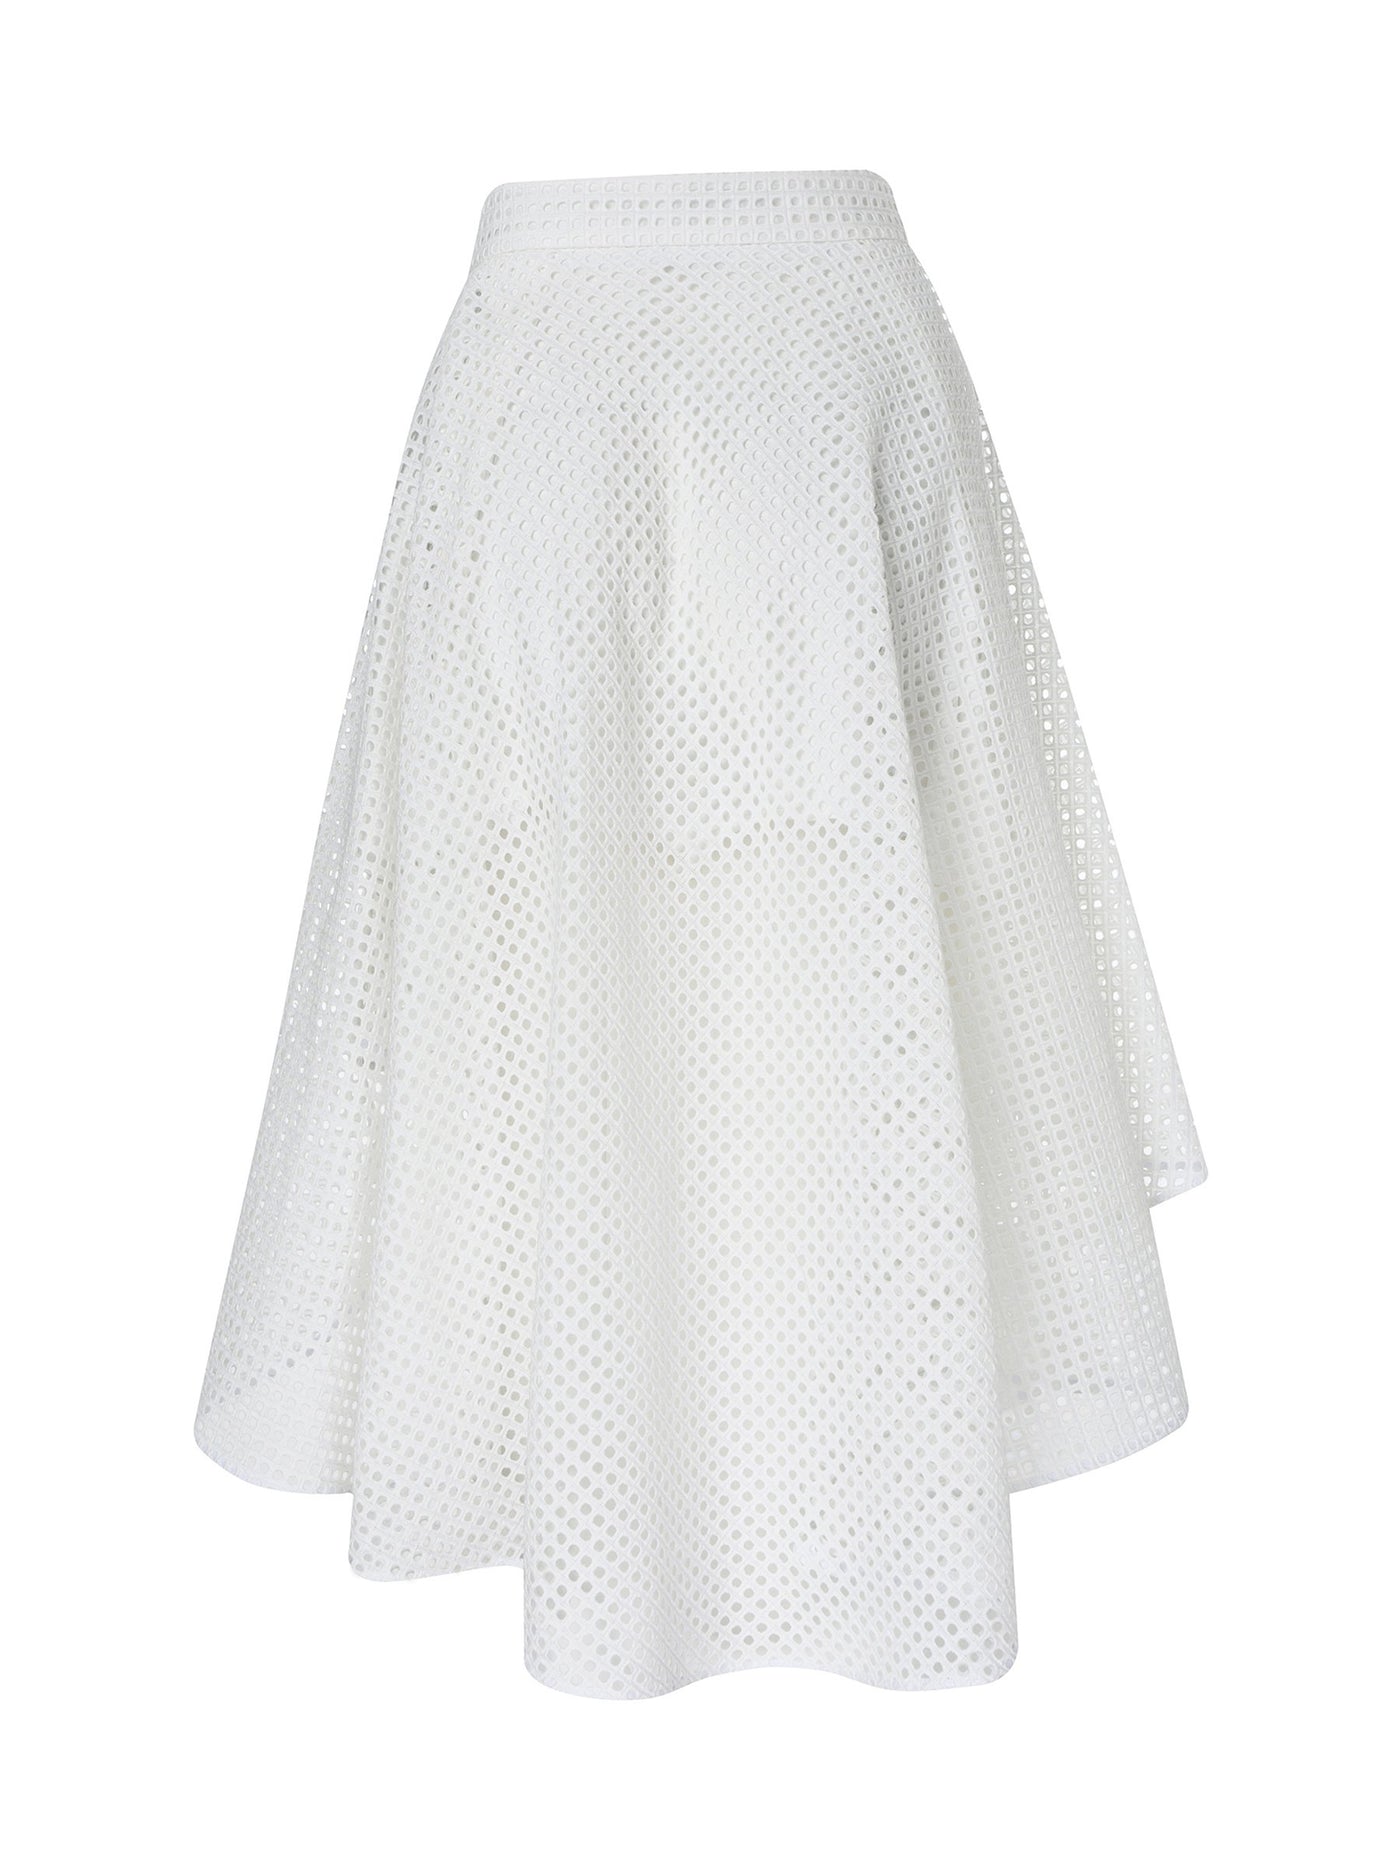 Back view broderie anglaise mini high low skirt